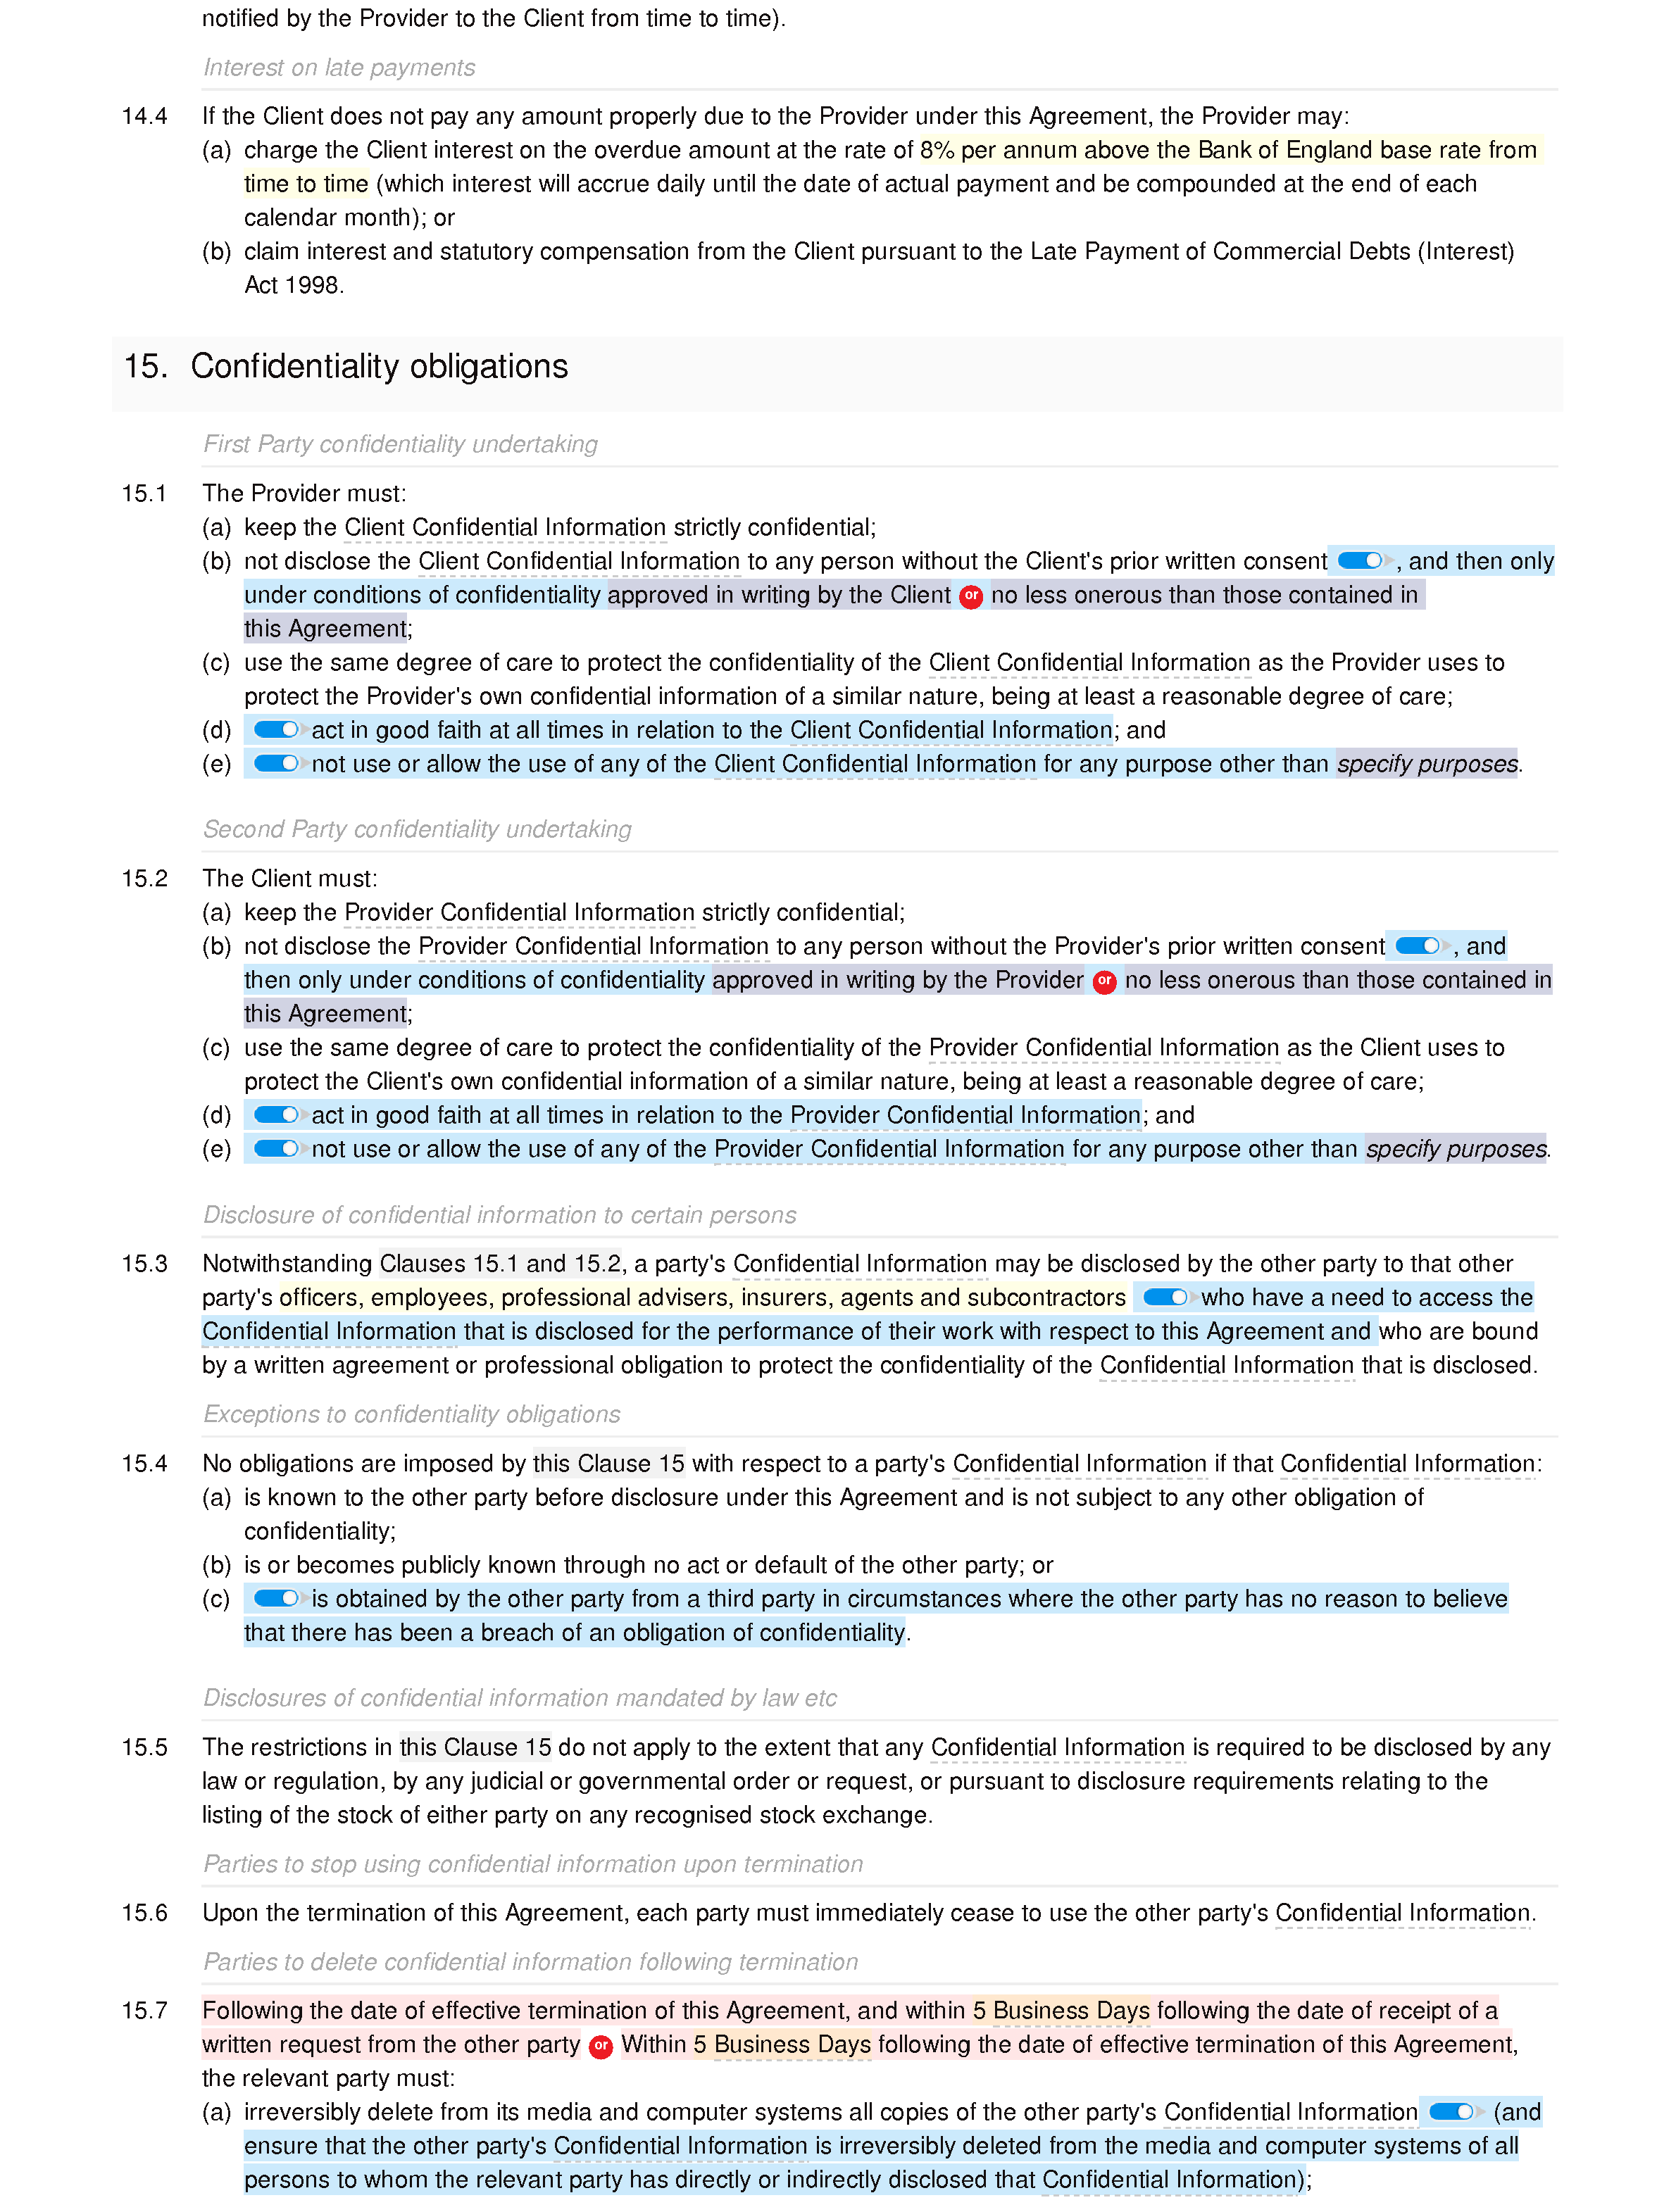 Free SEO agreement document editor preview